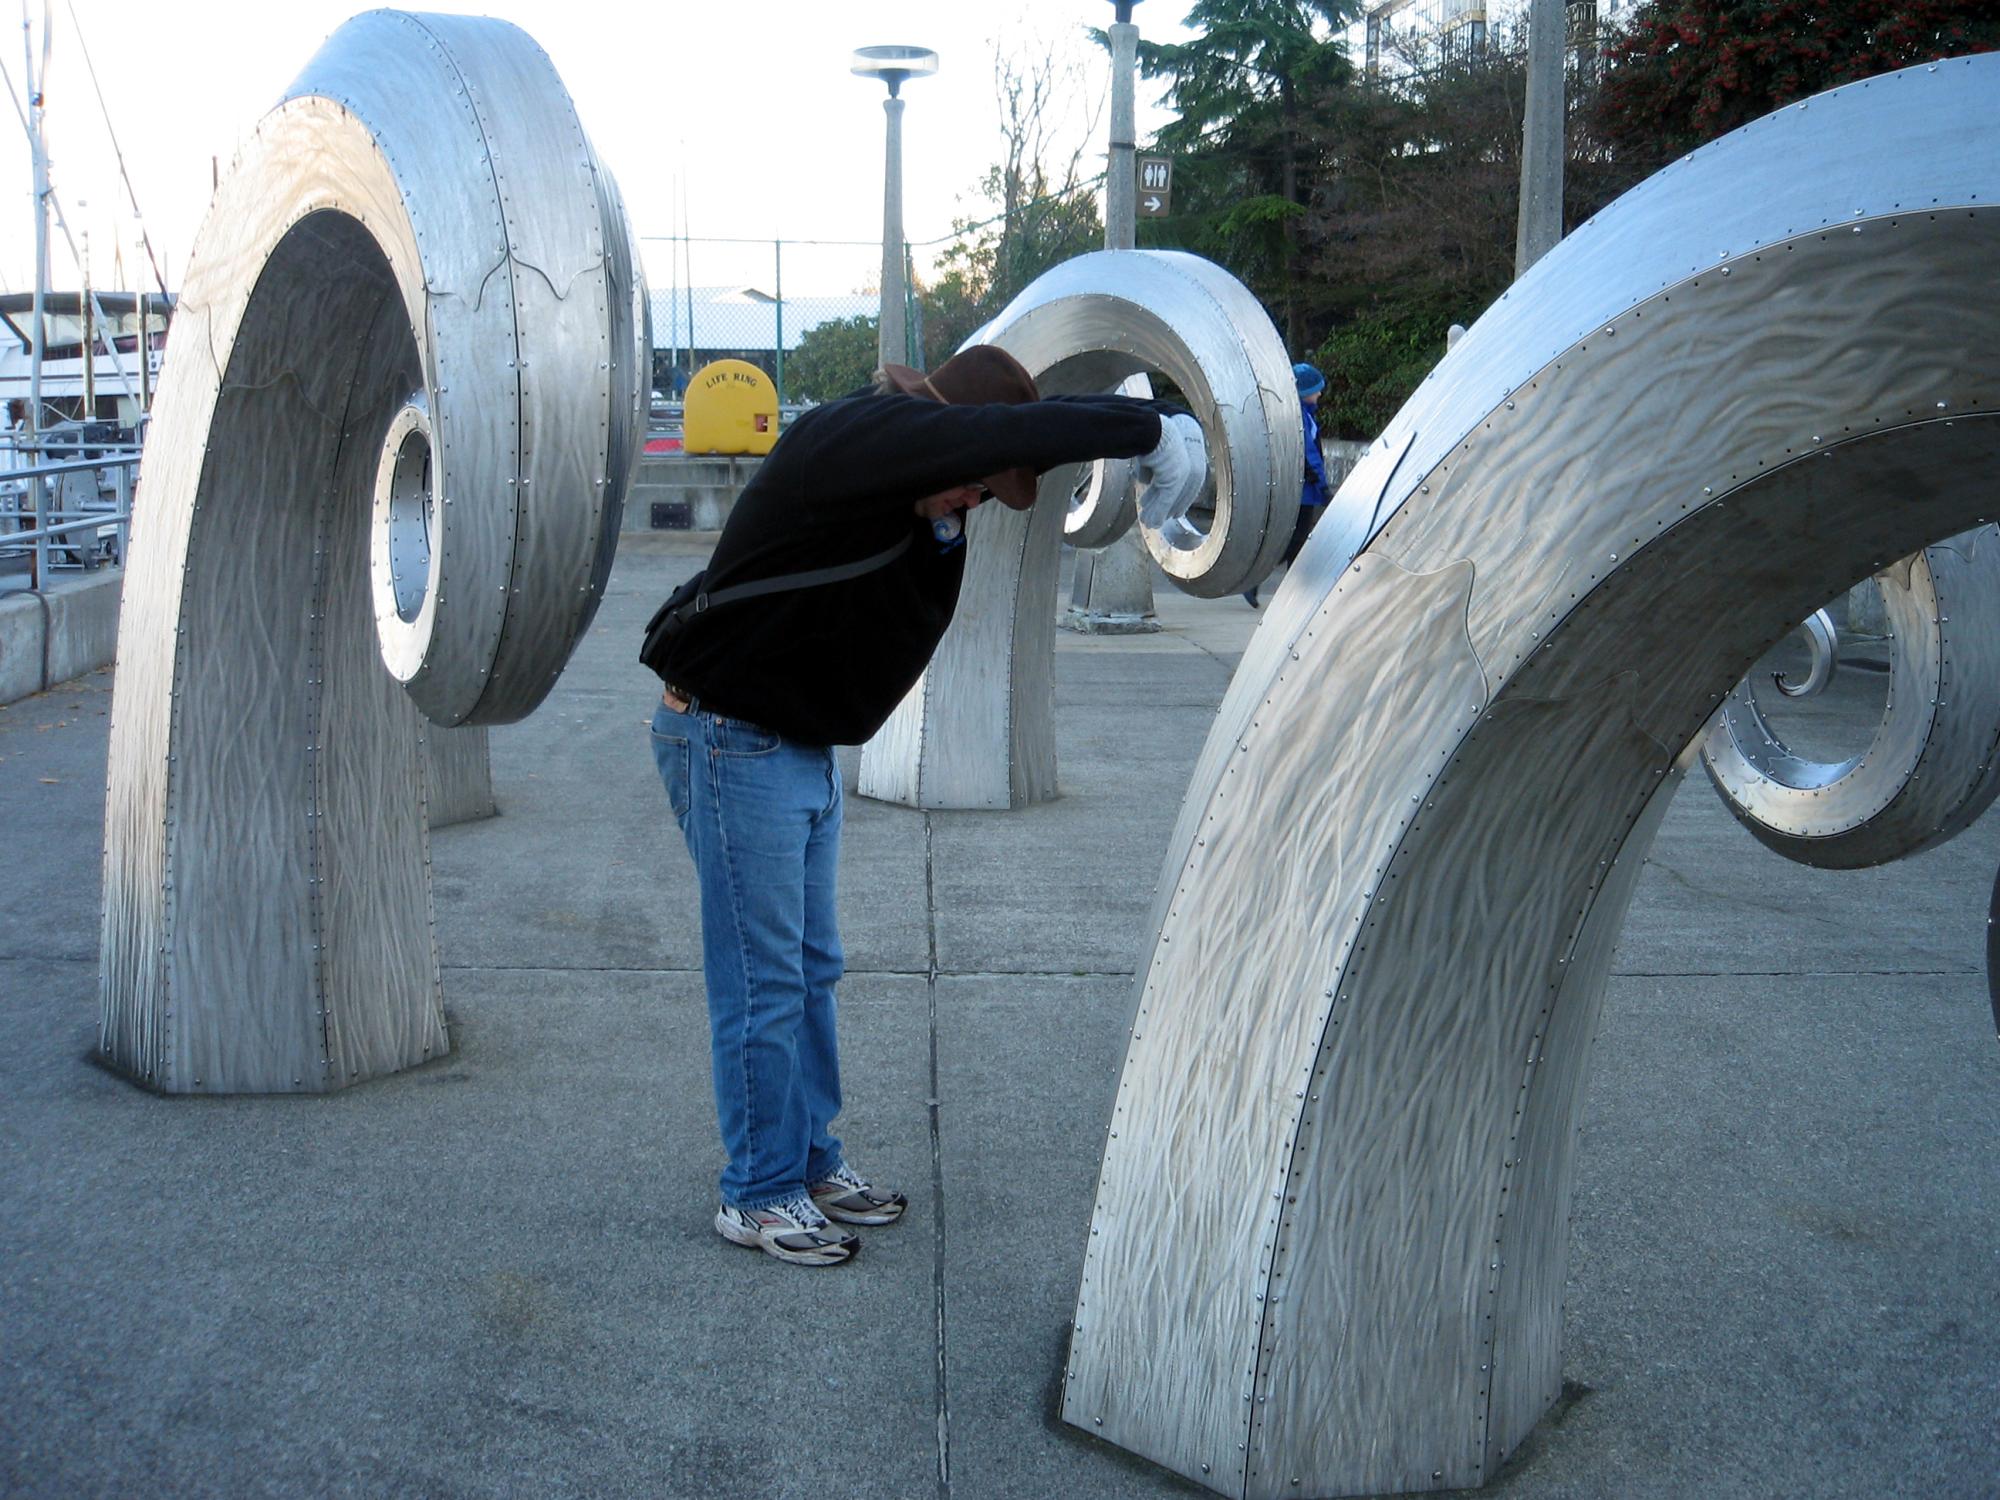 Seattle (2002-2009) - Will Wave #2